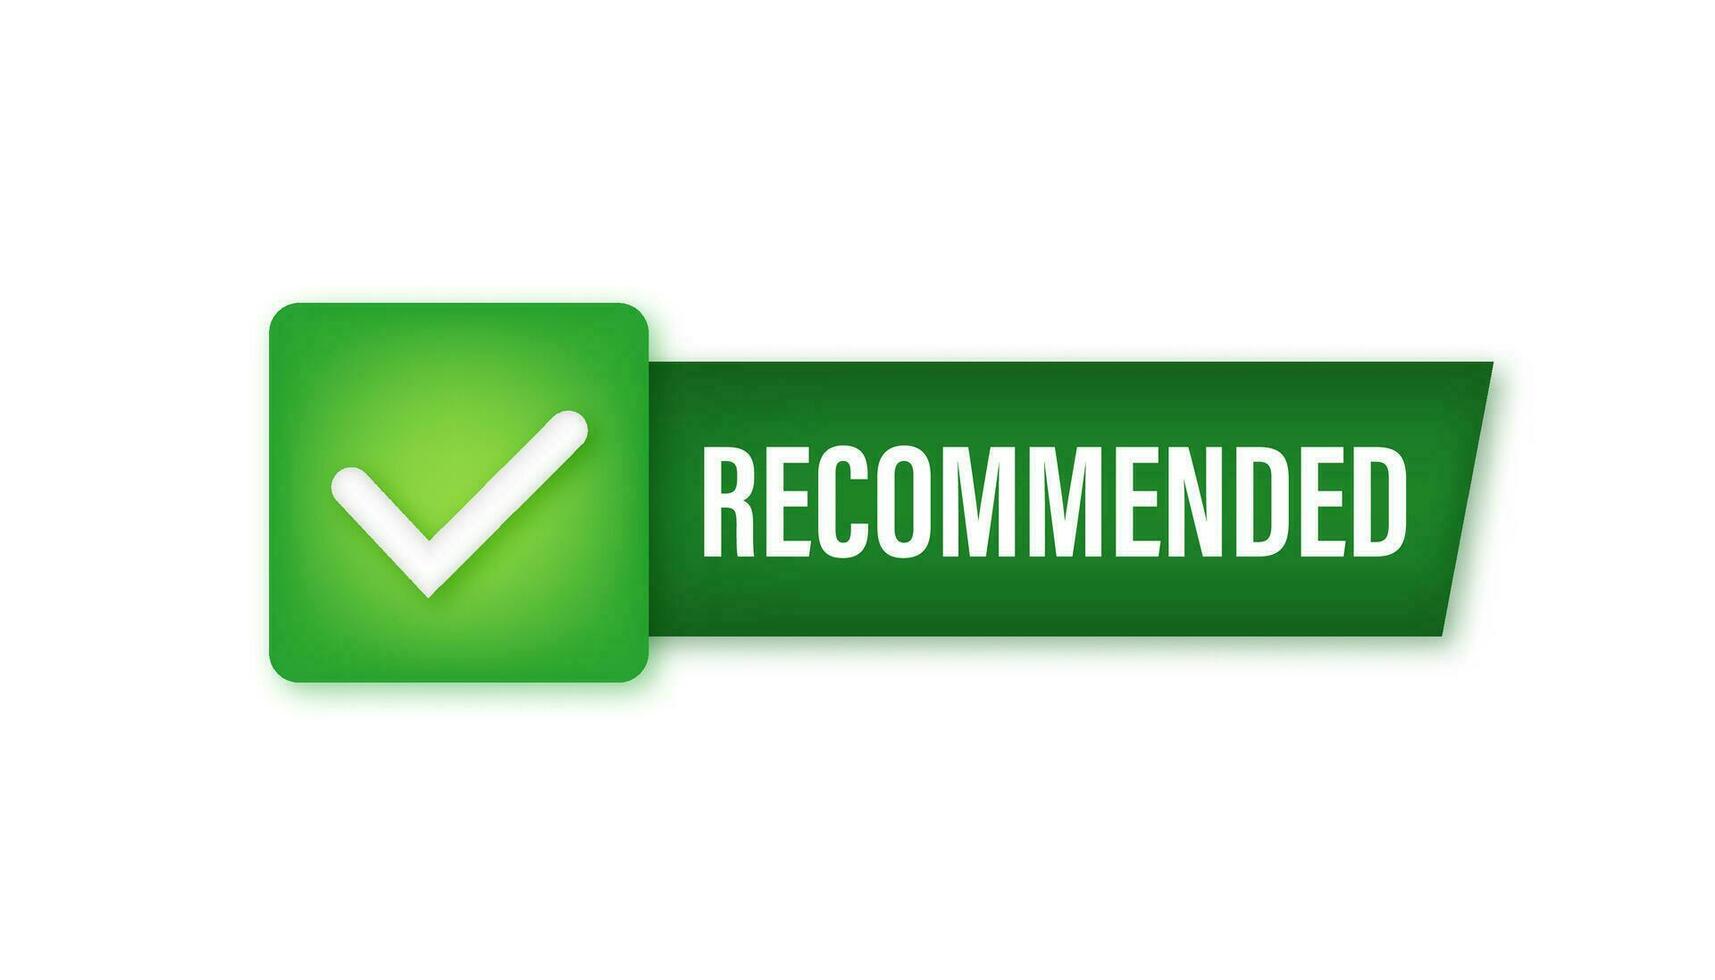 Recommend icon. White label recommended on green background. Vector illustration.